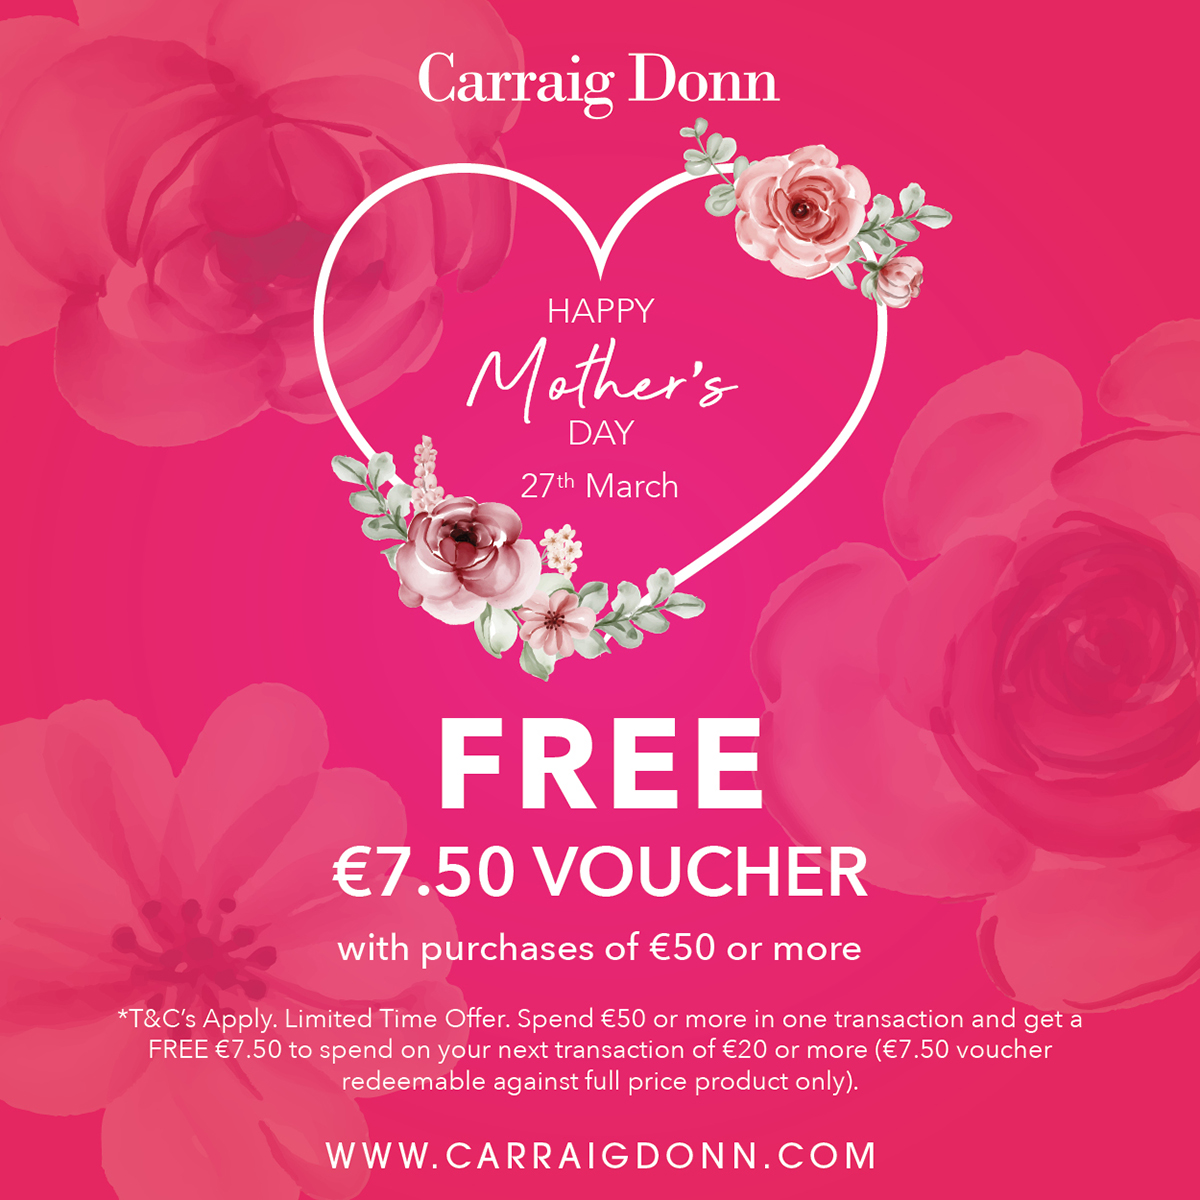 Mother's Day at Carraig Donn